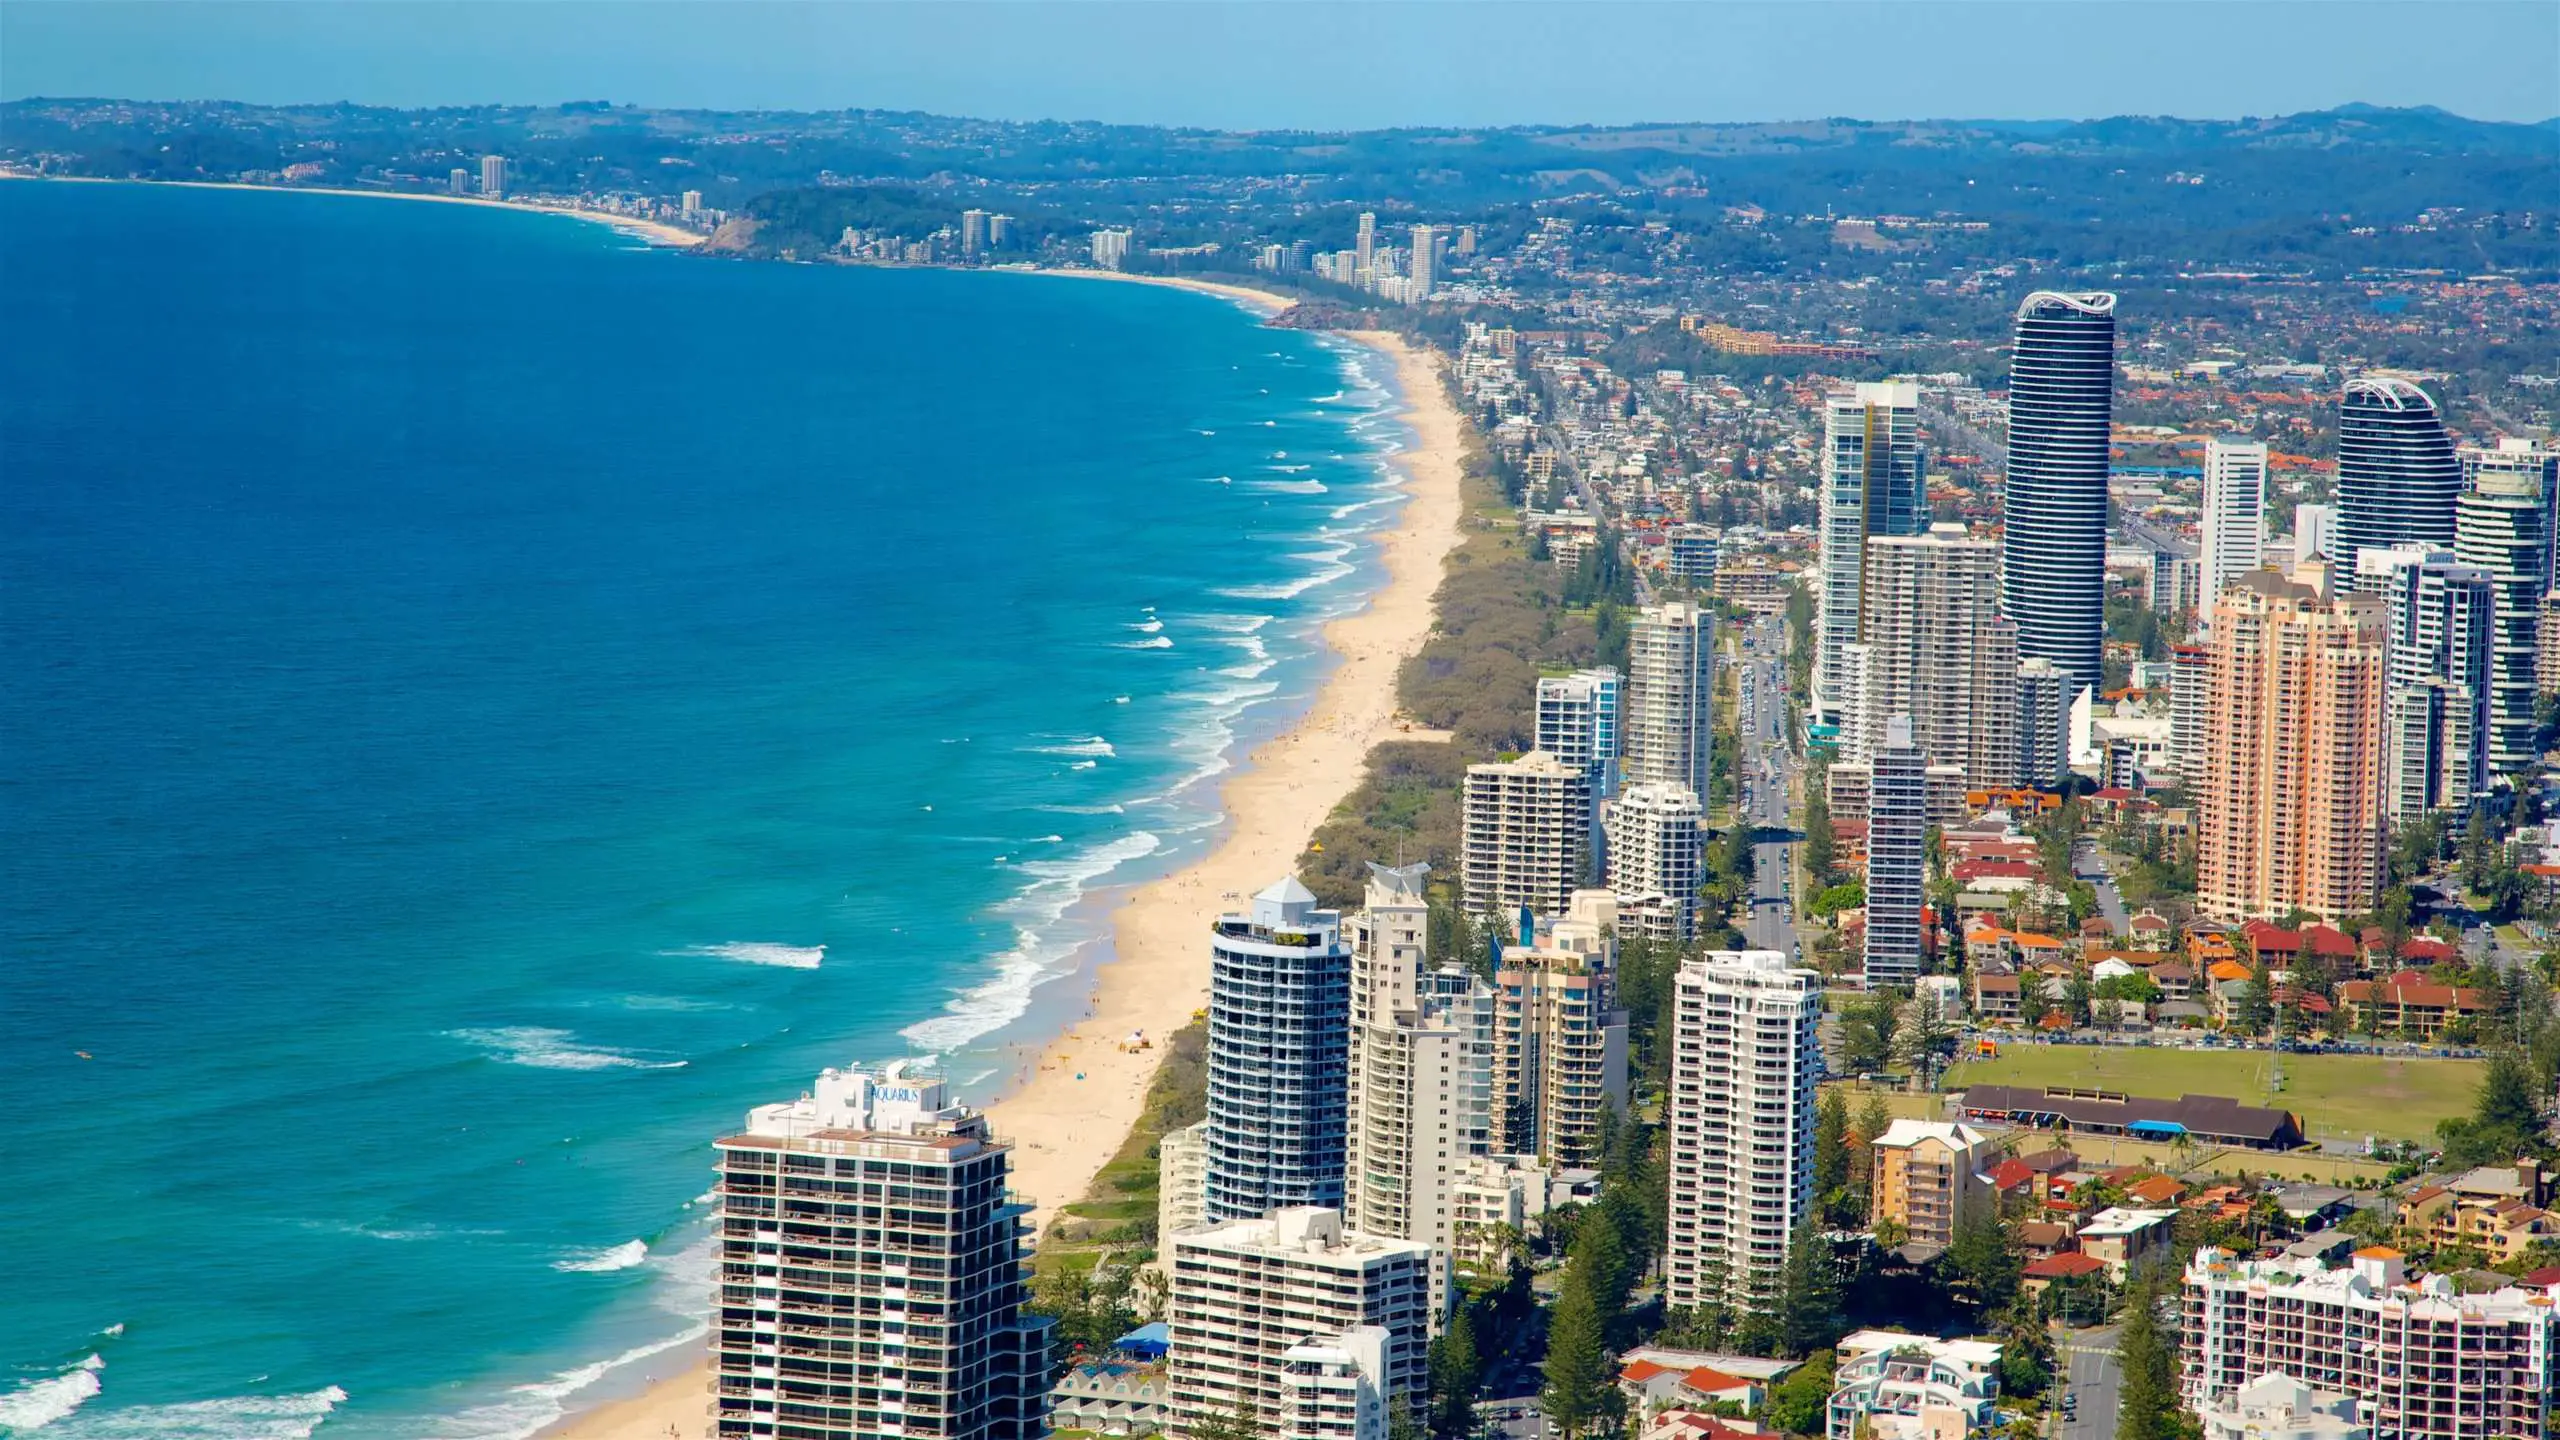 Best Hotels in Gold Coast for 2020